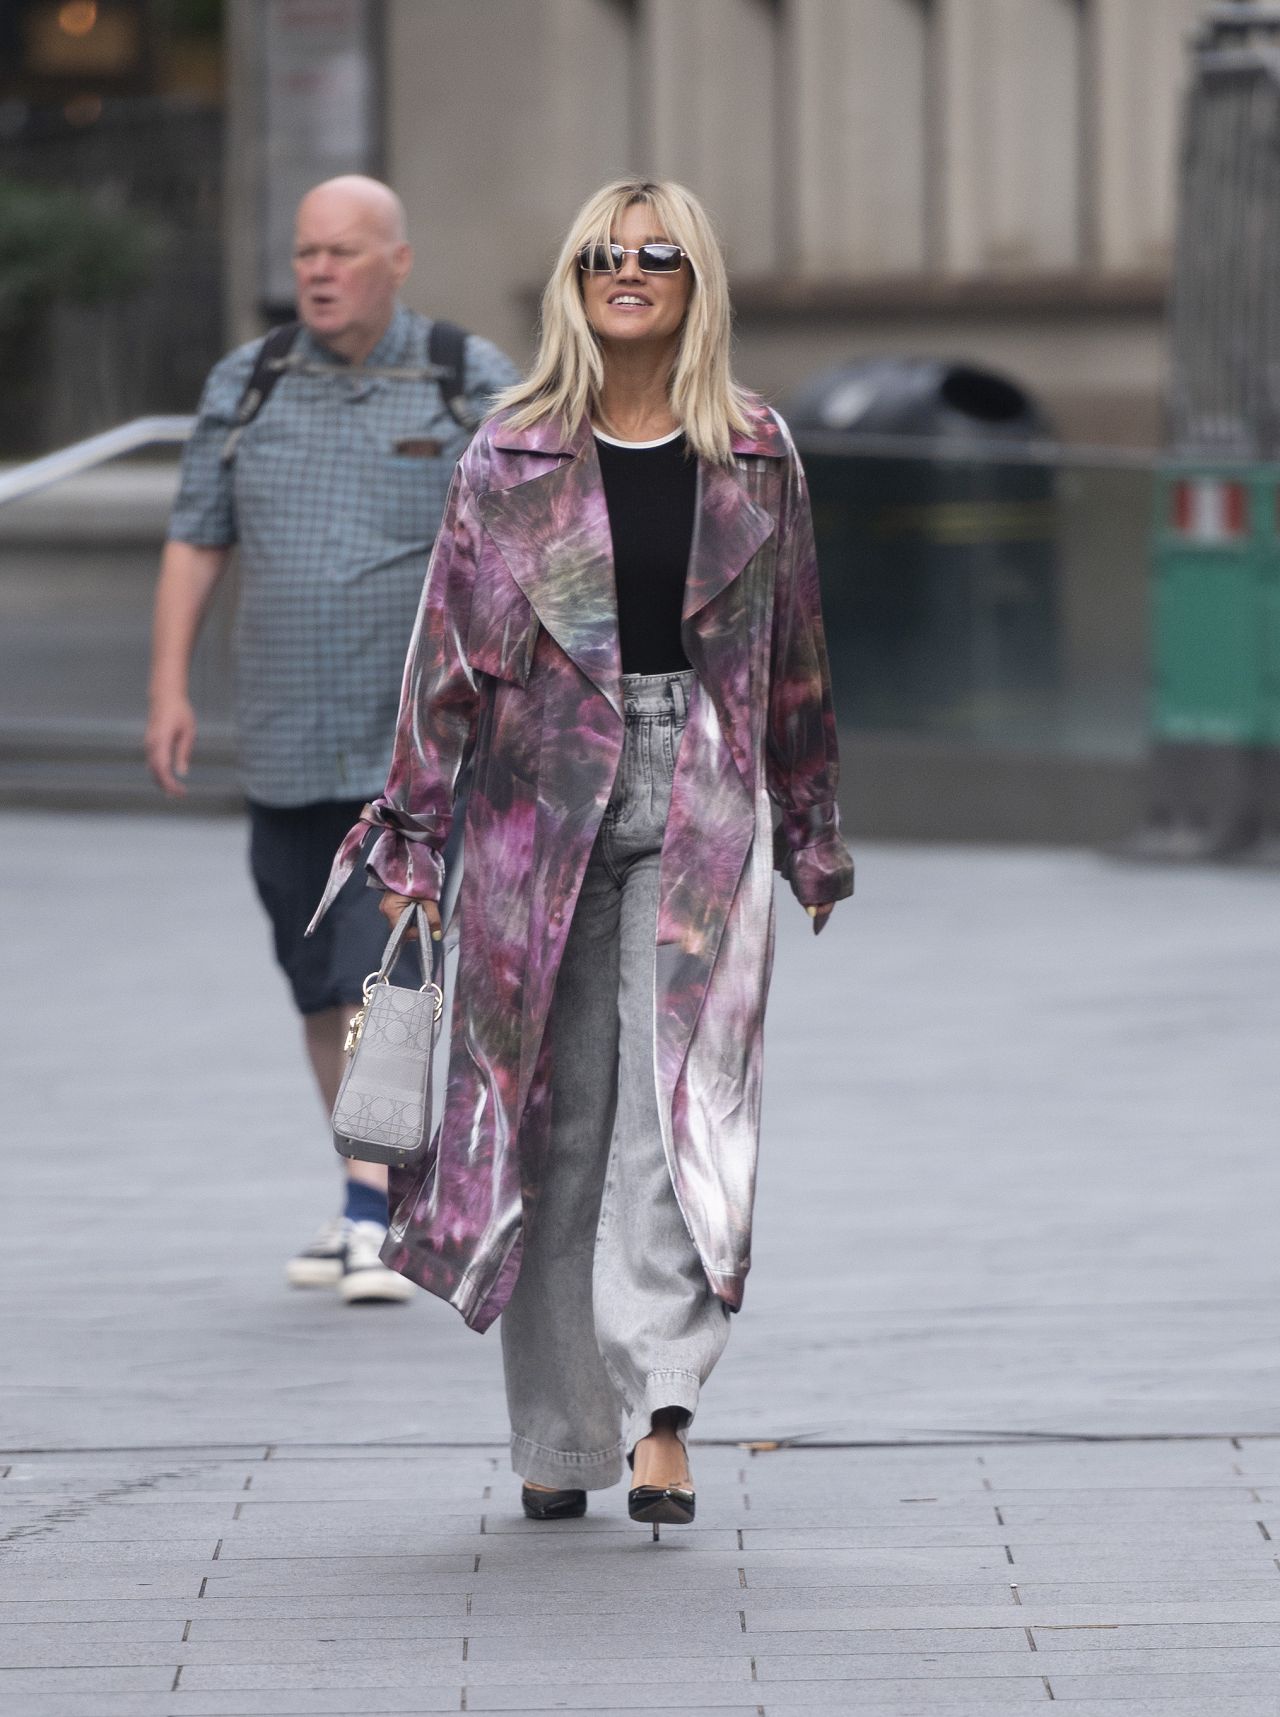 ashley-roberts-in-a-purple-and-pink-coat-and-grey-trousers-09-23-2020-5.jpg